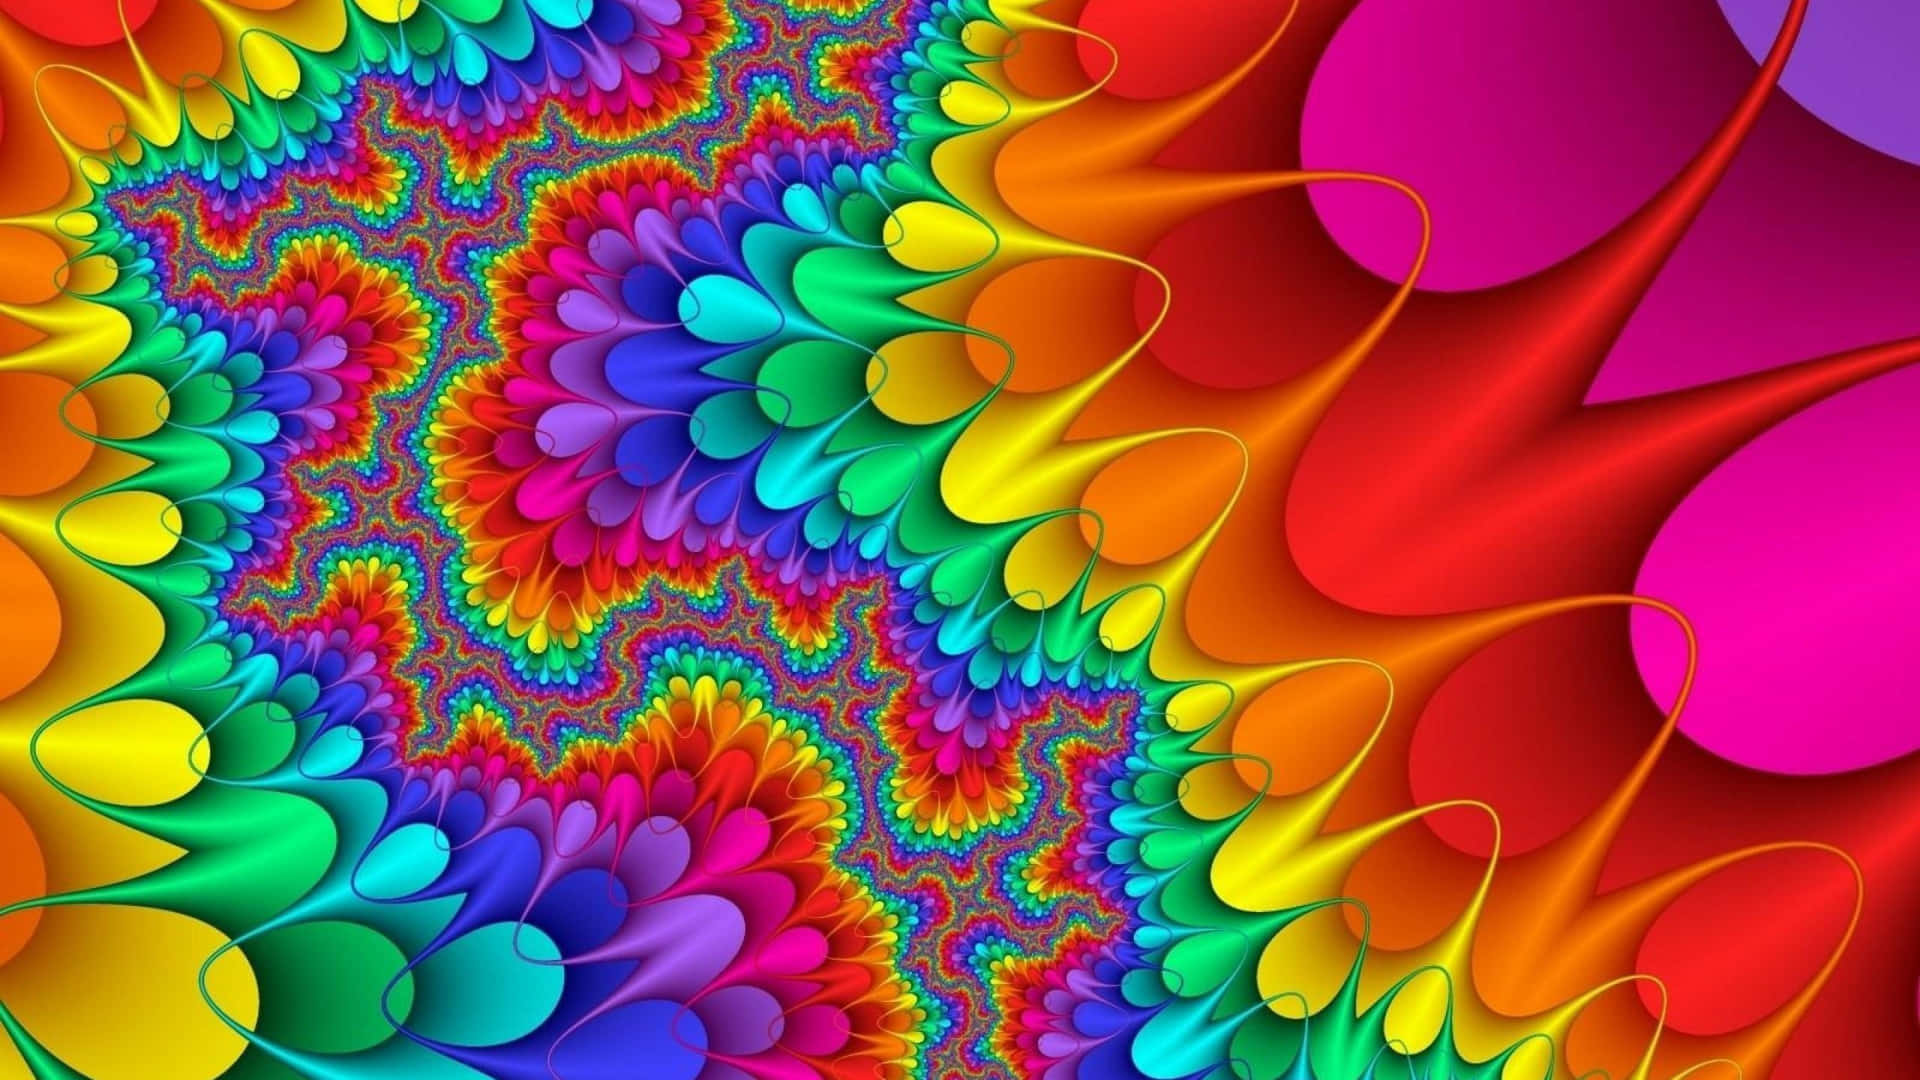 A Colorful Fractal Design With Colorful Flowers Wallpaper